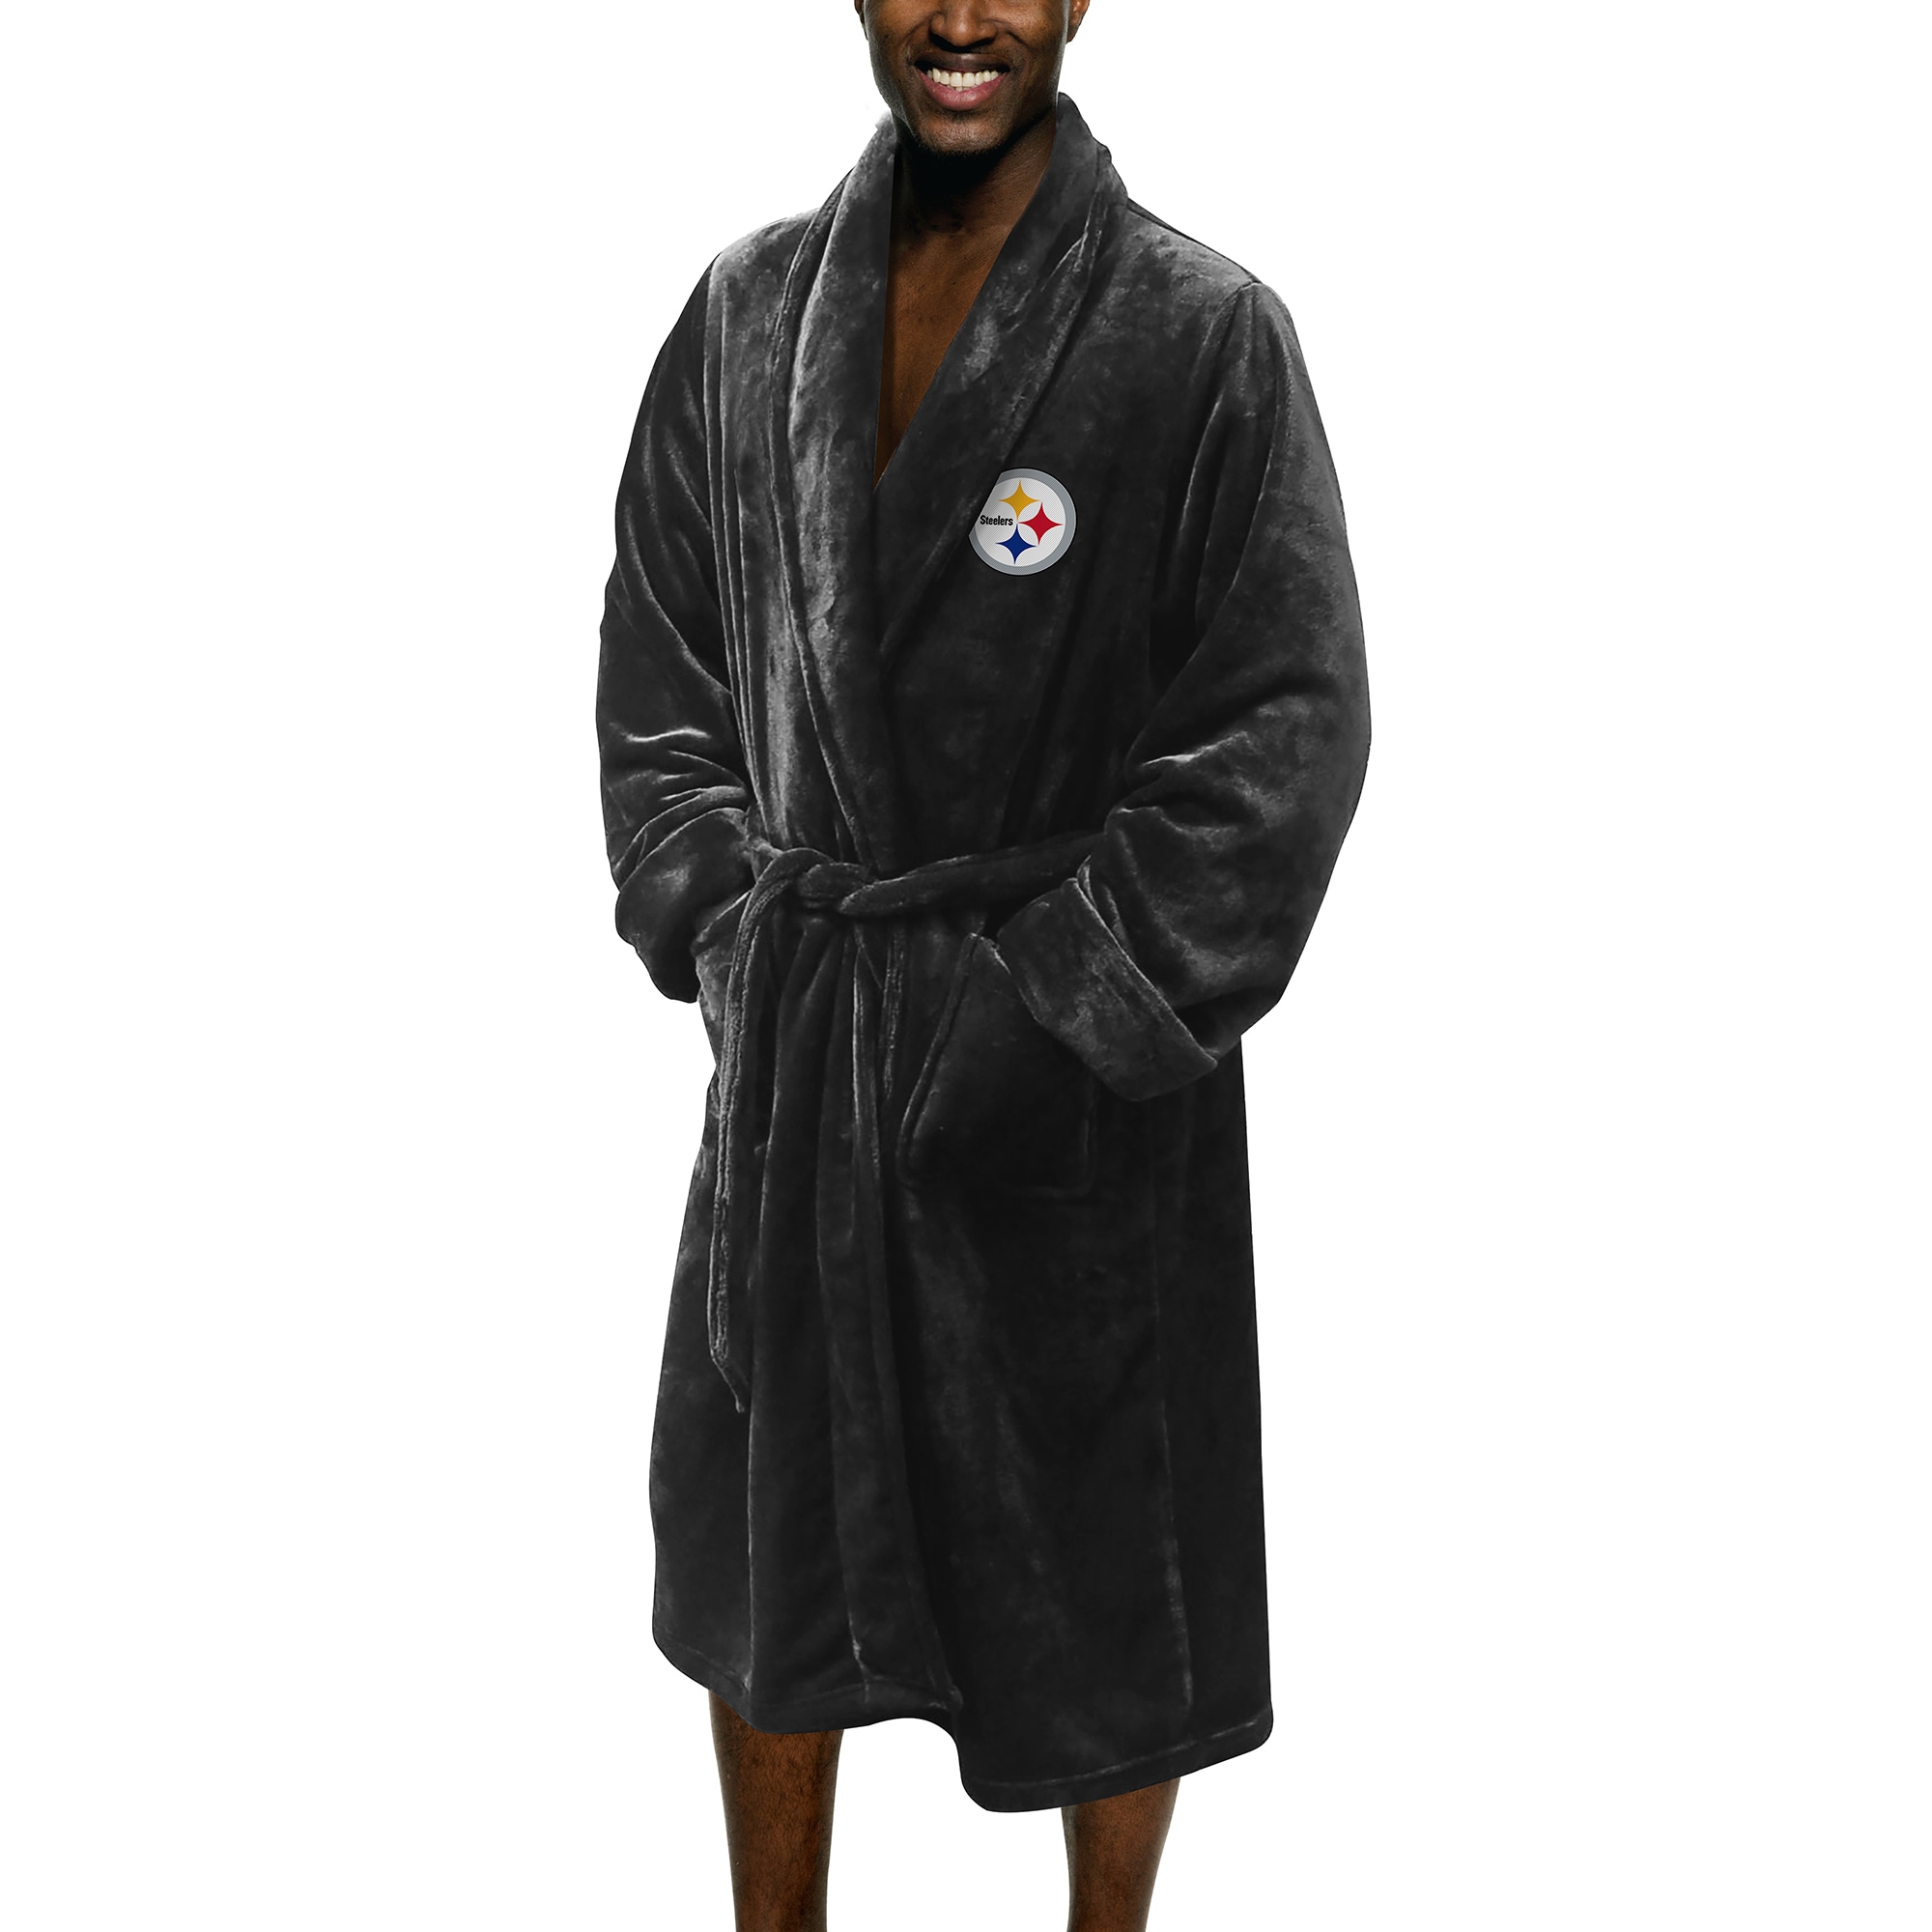 Men's The Northwest Company Black Pittsburgh Steelers Silk Touch Robe - image 1 of 2